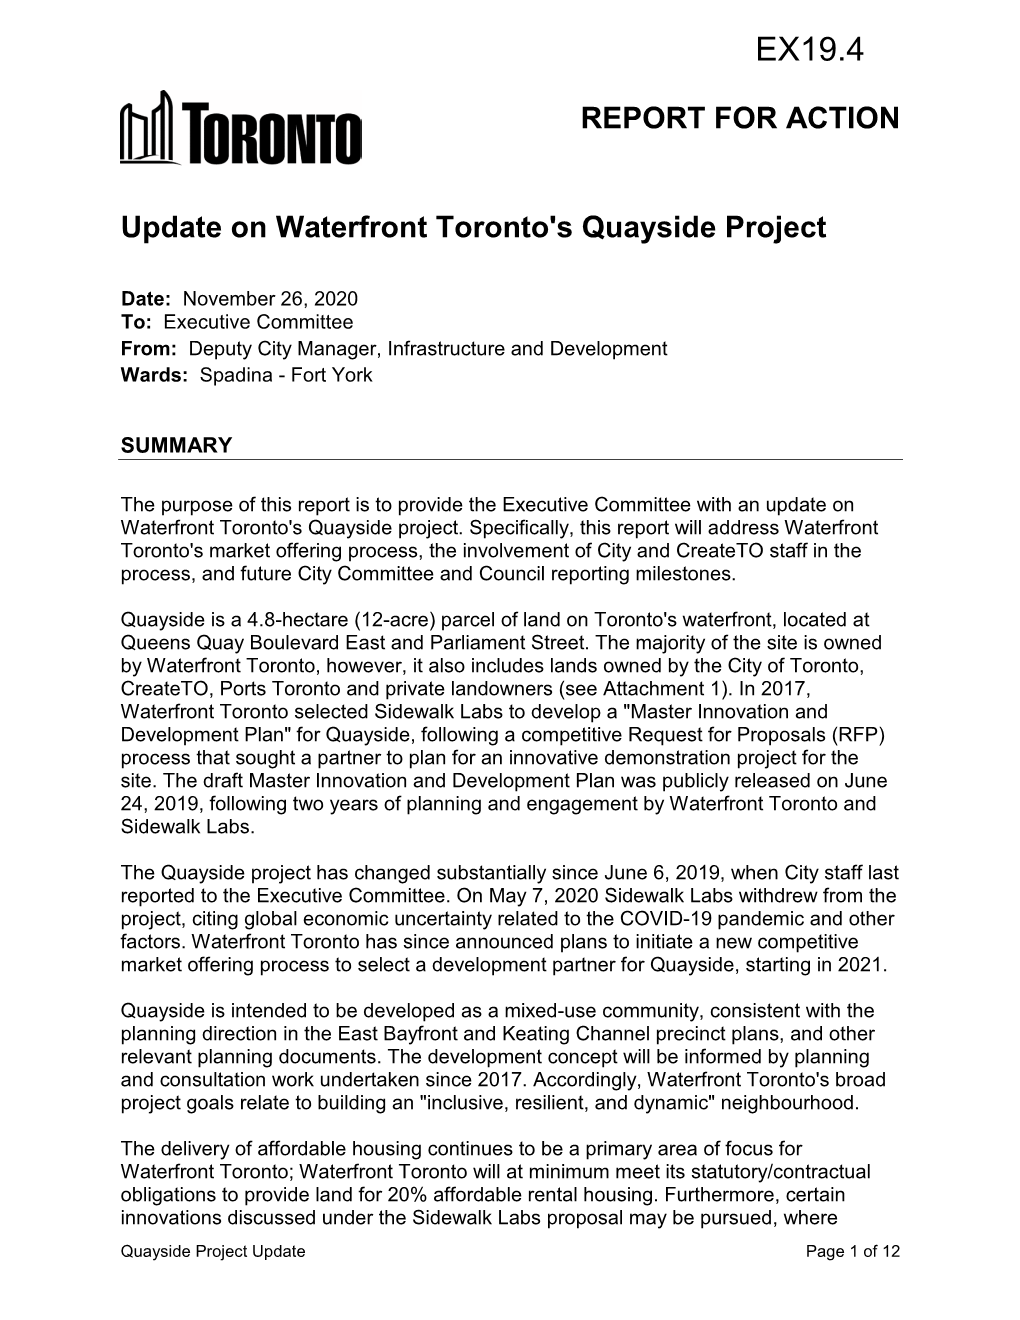 Update on Waterfront Toronto's Quayside Project